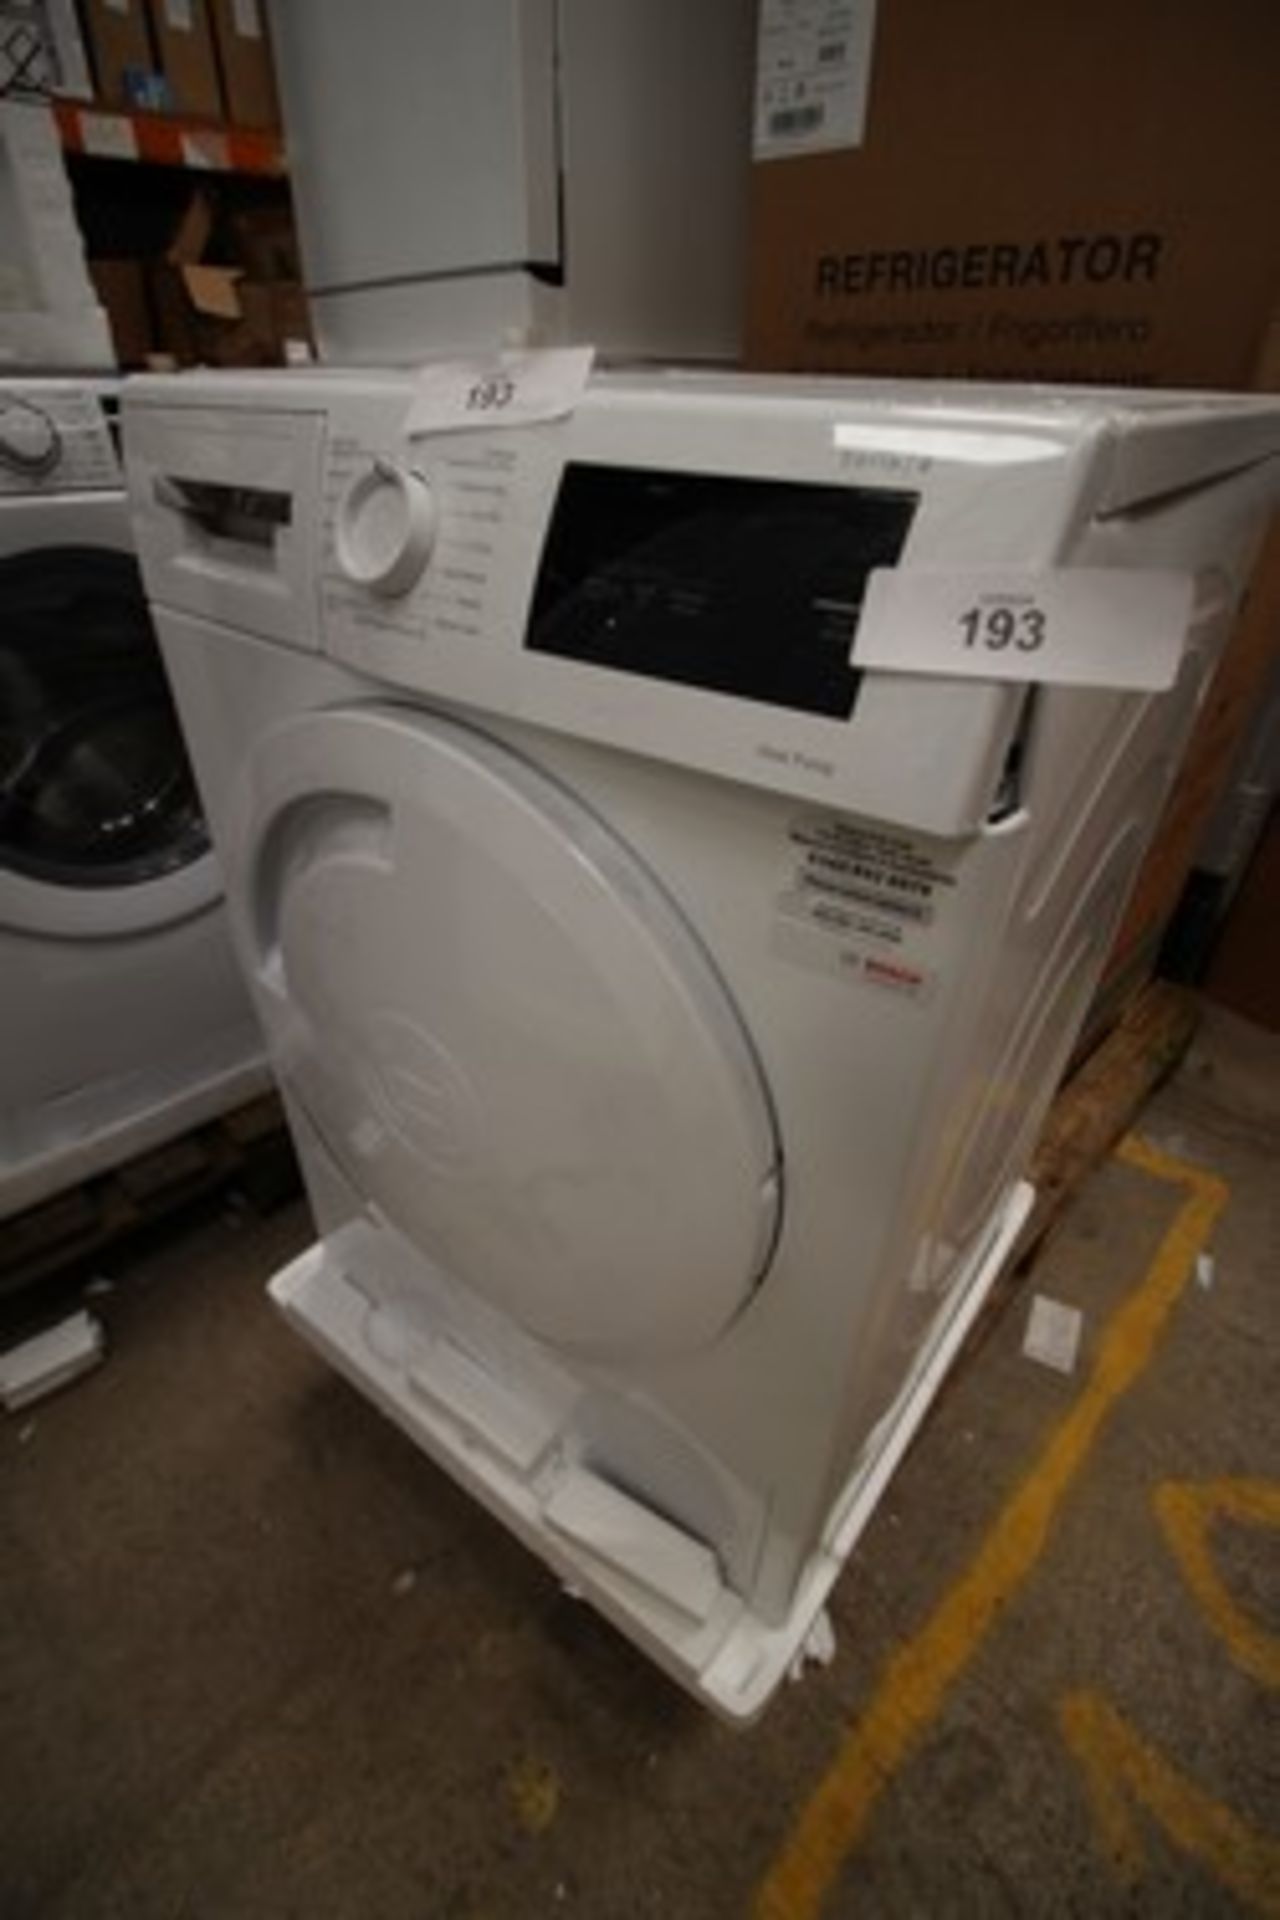 1 x Bosch Serie 4 tumble dryer machine, Model WTH84001GB, damaged control panel and top panel -